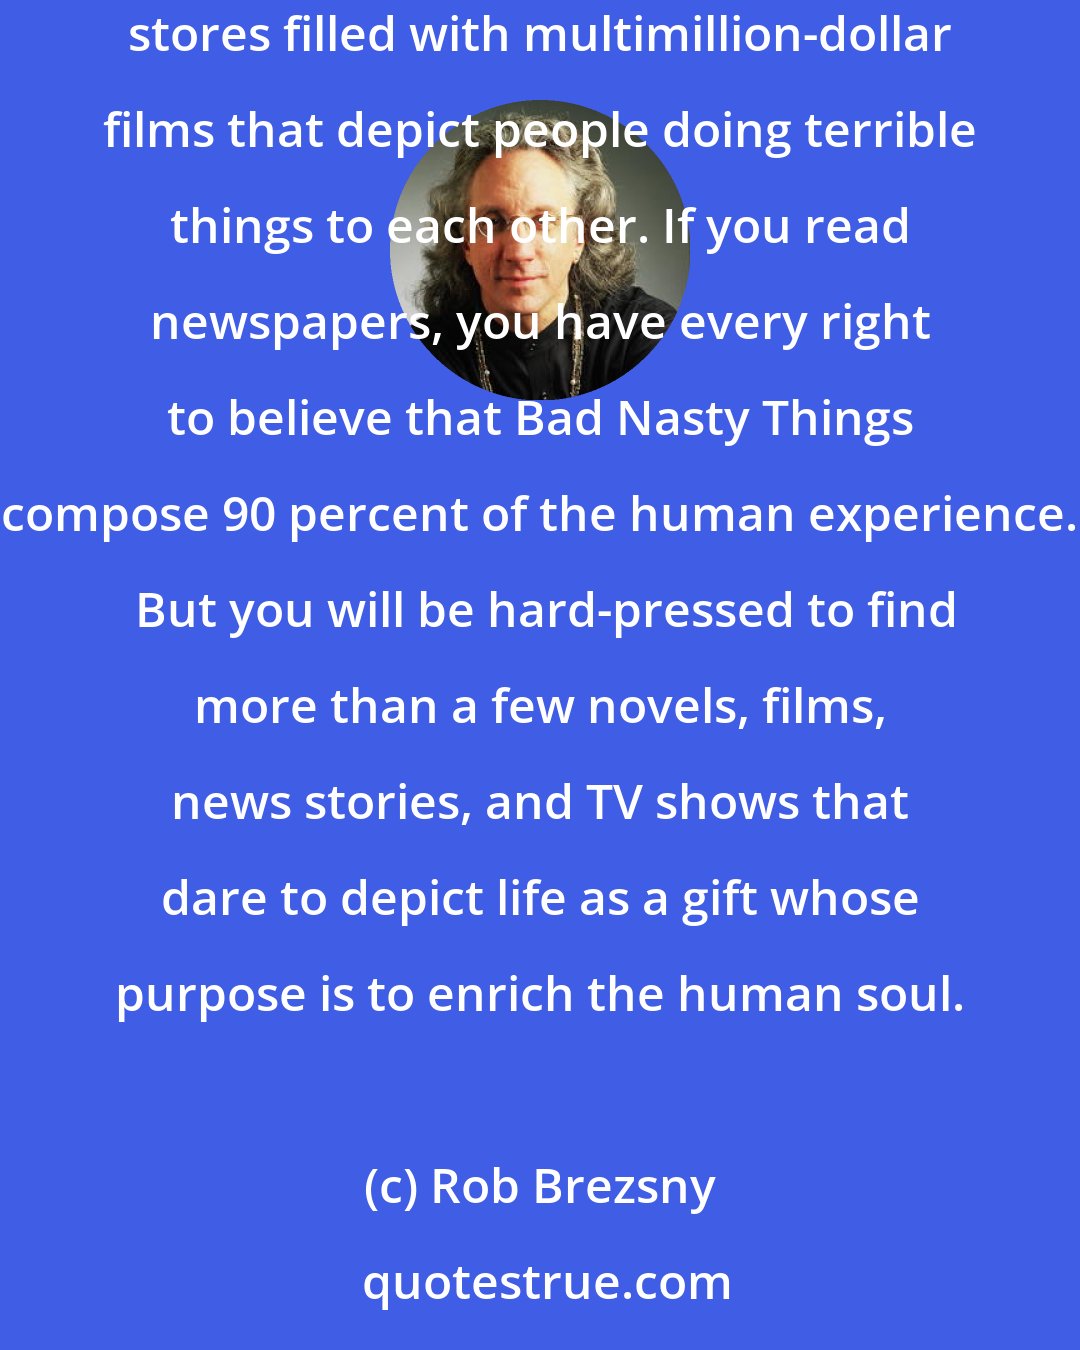 Rob Brezsny: The average American child sees 20,000 murders in TV before reaching age 18. This is considered normal. Every community has video rental stores filled with multimillion-dollar films that depict people doing terrible things to each other. If you read newspapers, you have every right to believe that Bad Nasty Things compose 90 percent of the human experience.  But you will be hard-pressed to find more than a few novels, films, news stories, and TV shows that dare to depict life as a gift whose purpose is to enrich the human soul.